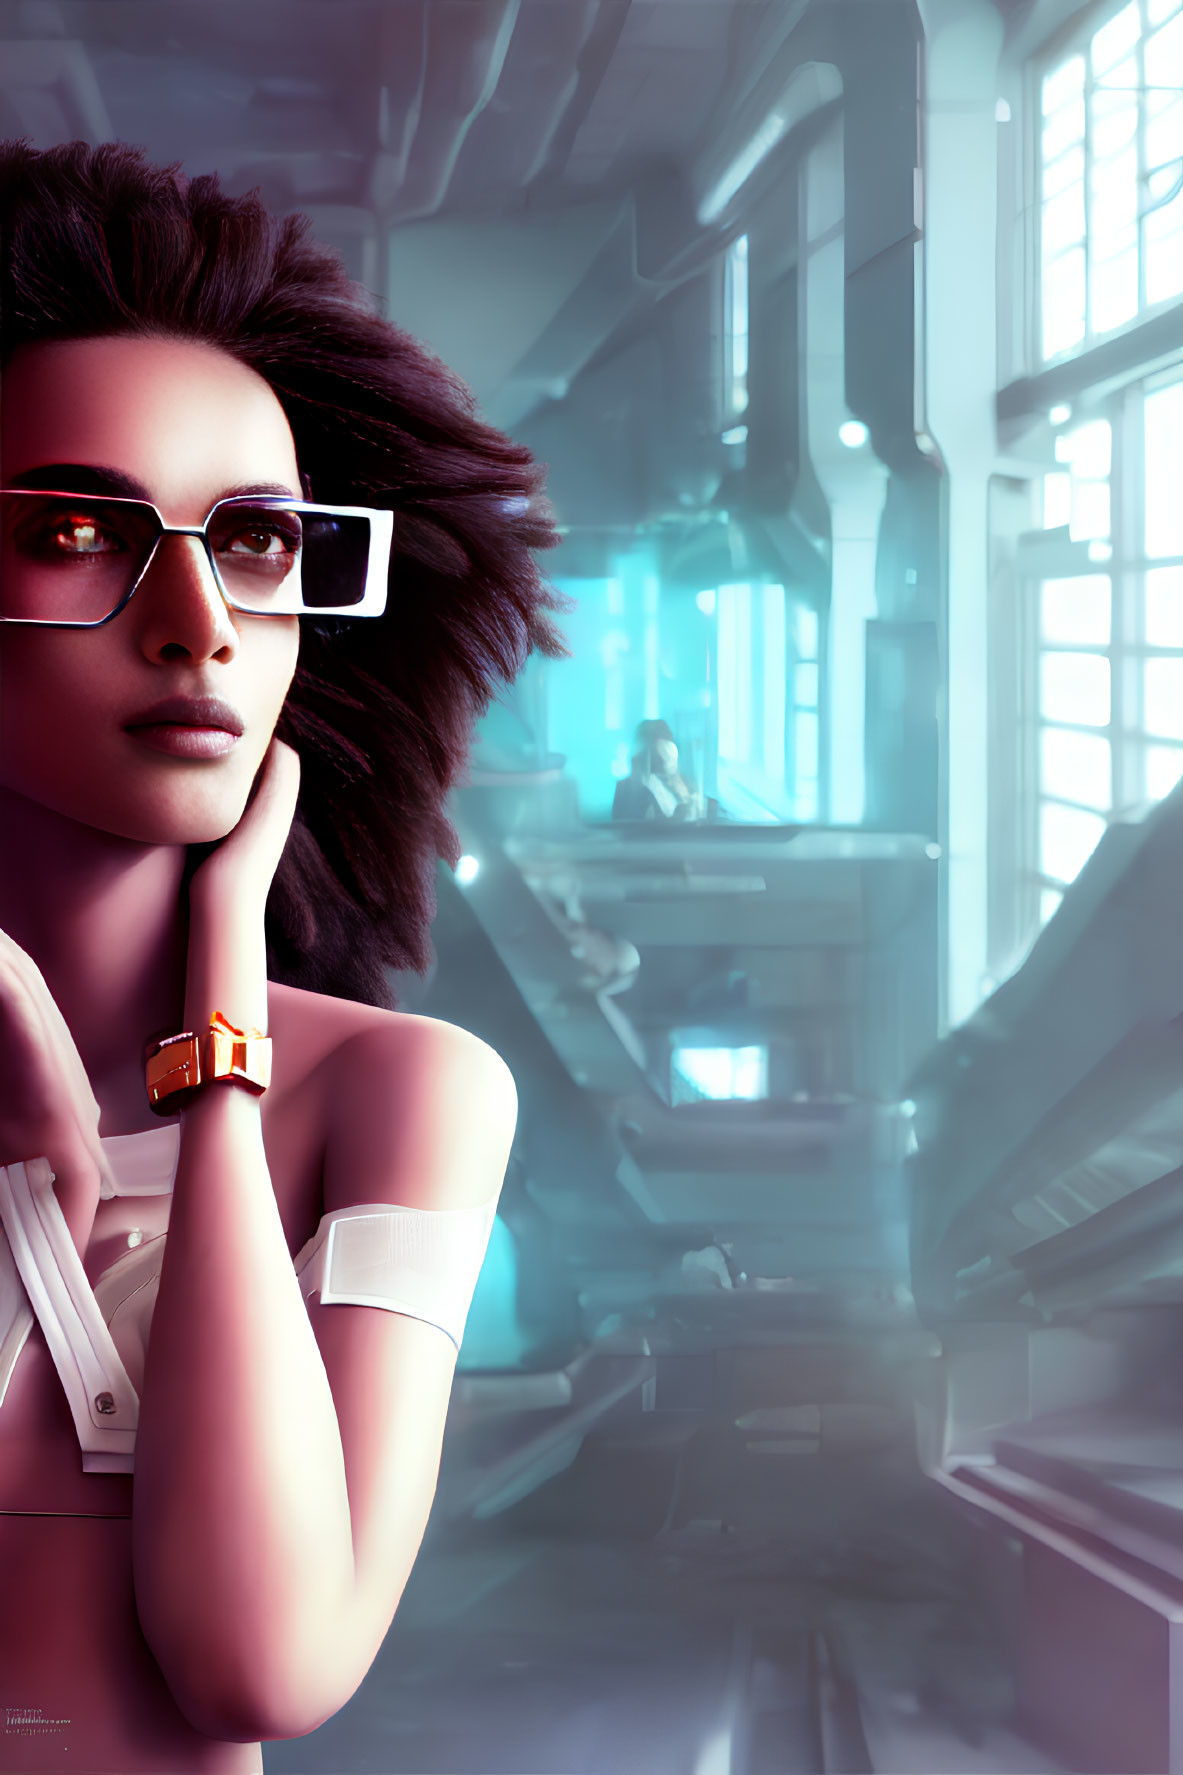 Fashionable woman with voluminous hair and futuristic sunglasses in sci-fi setting